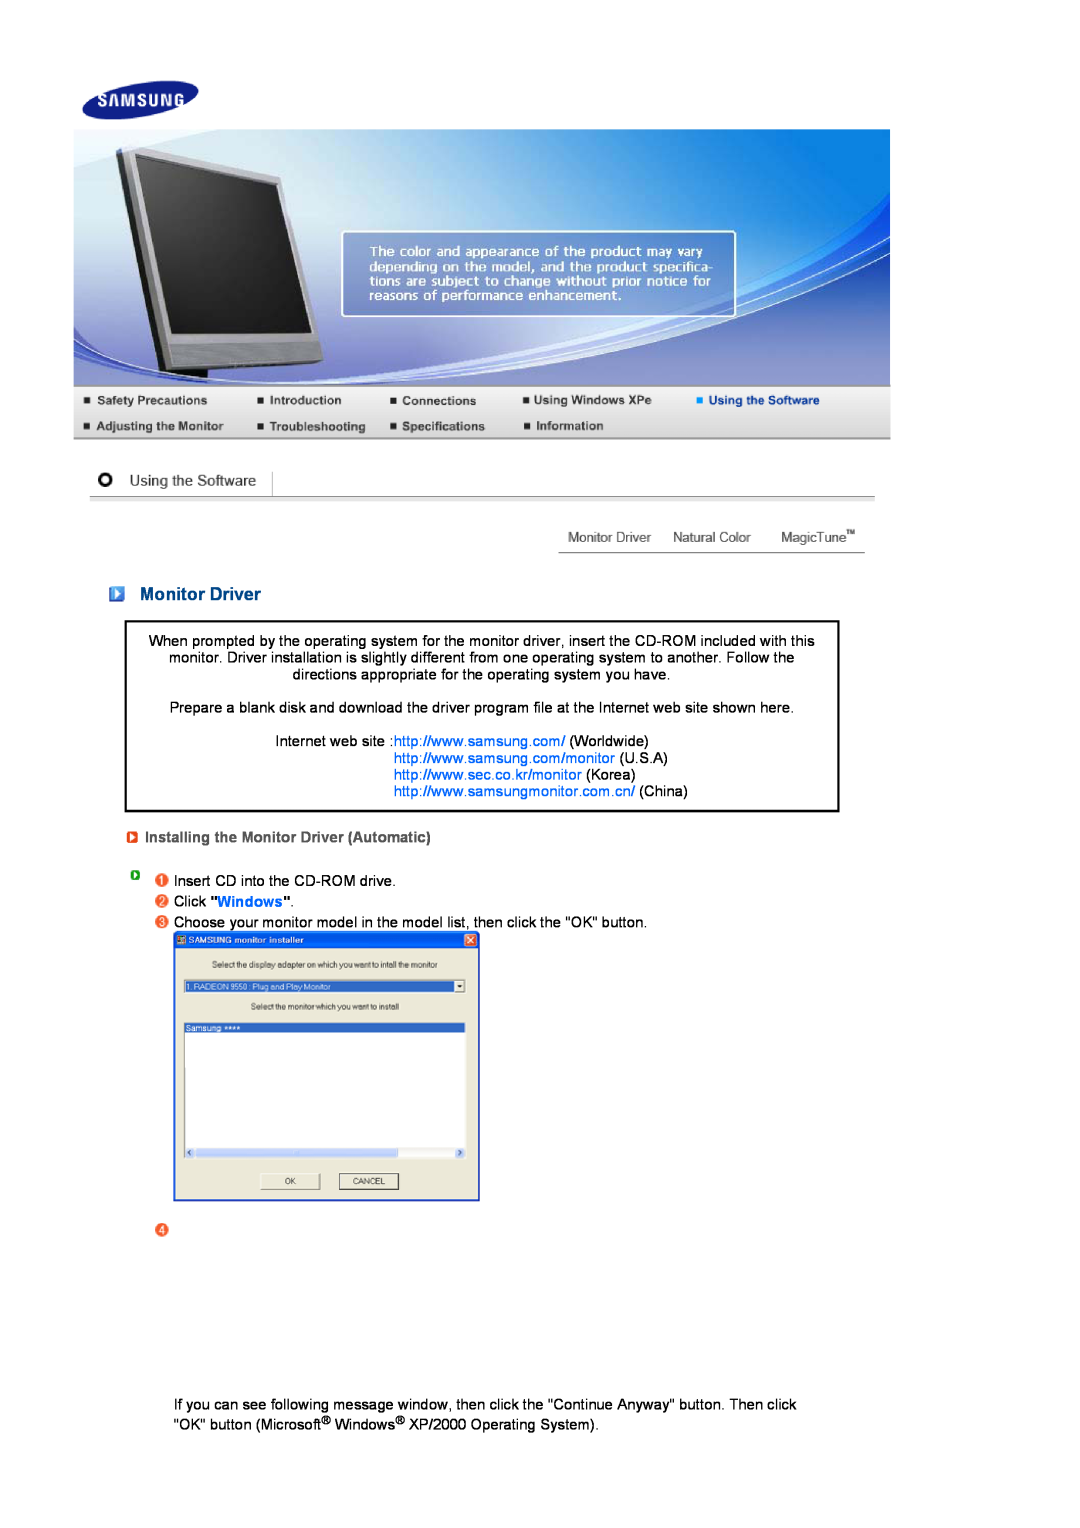 Samsung 920XT manual Installing the Monitor Driver Automatic 